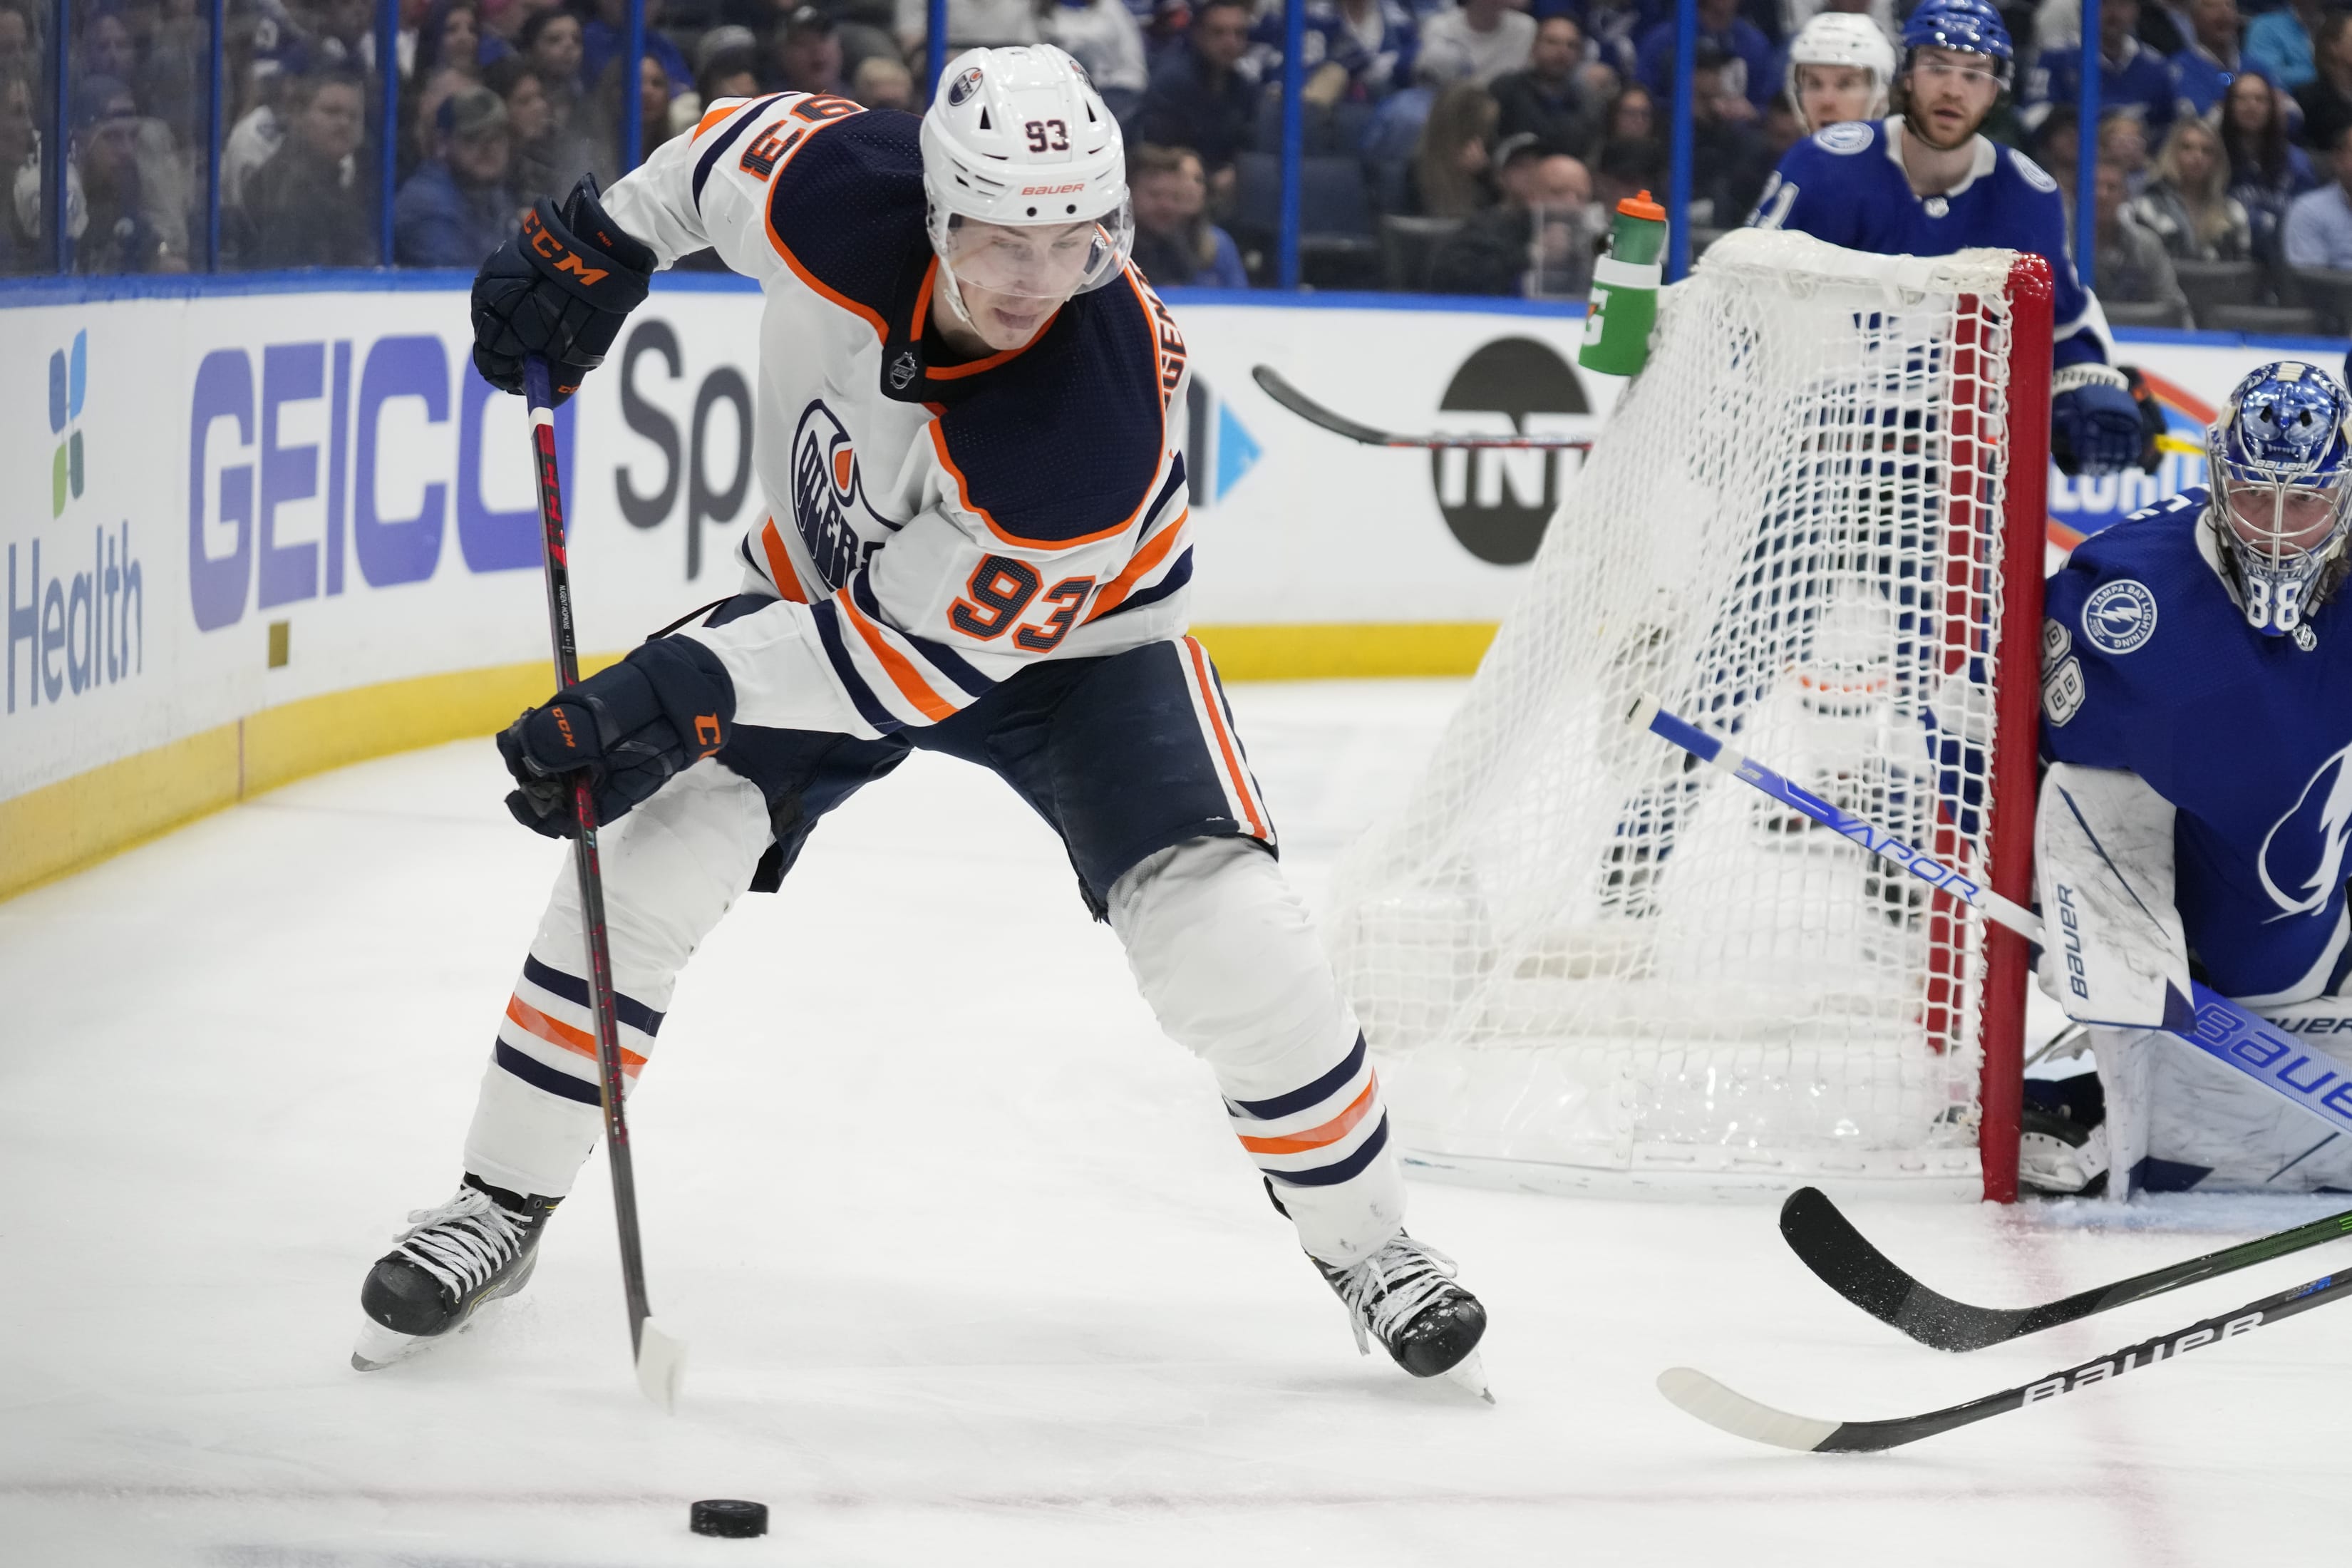 Edmonton Oilers center Ryan Nugent-Hopkins (93) skates against the Tampa Bay Lightning during the third period of an NHL hockey game Wednesday, Feb. 23, 2022, in Tampa, Fla.